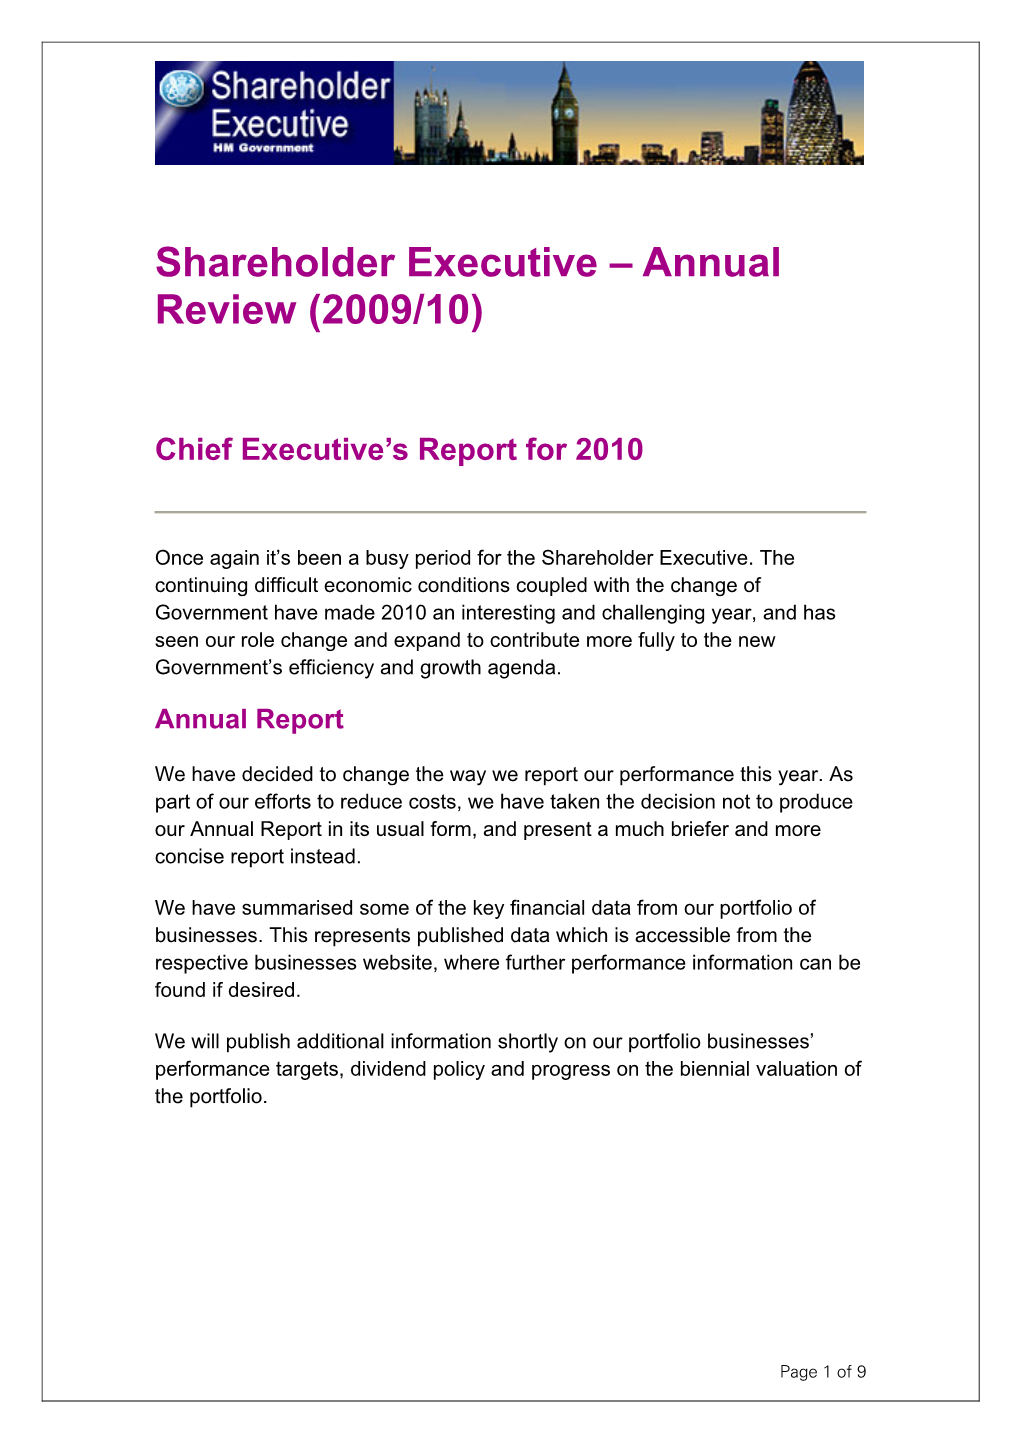 Shareholder Executive – Annual Review (2009/10)